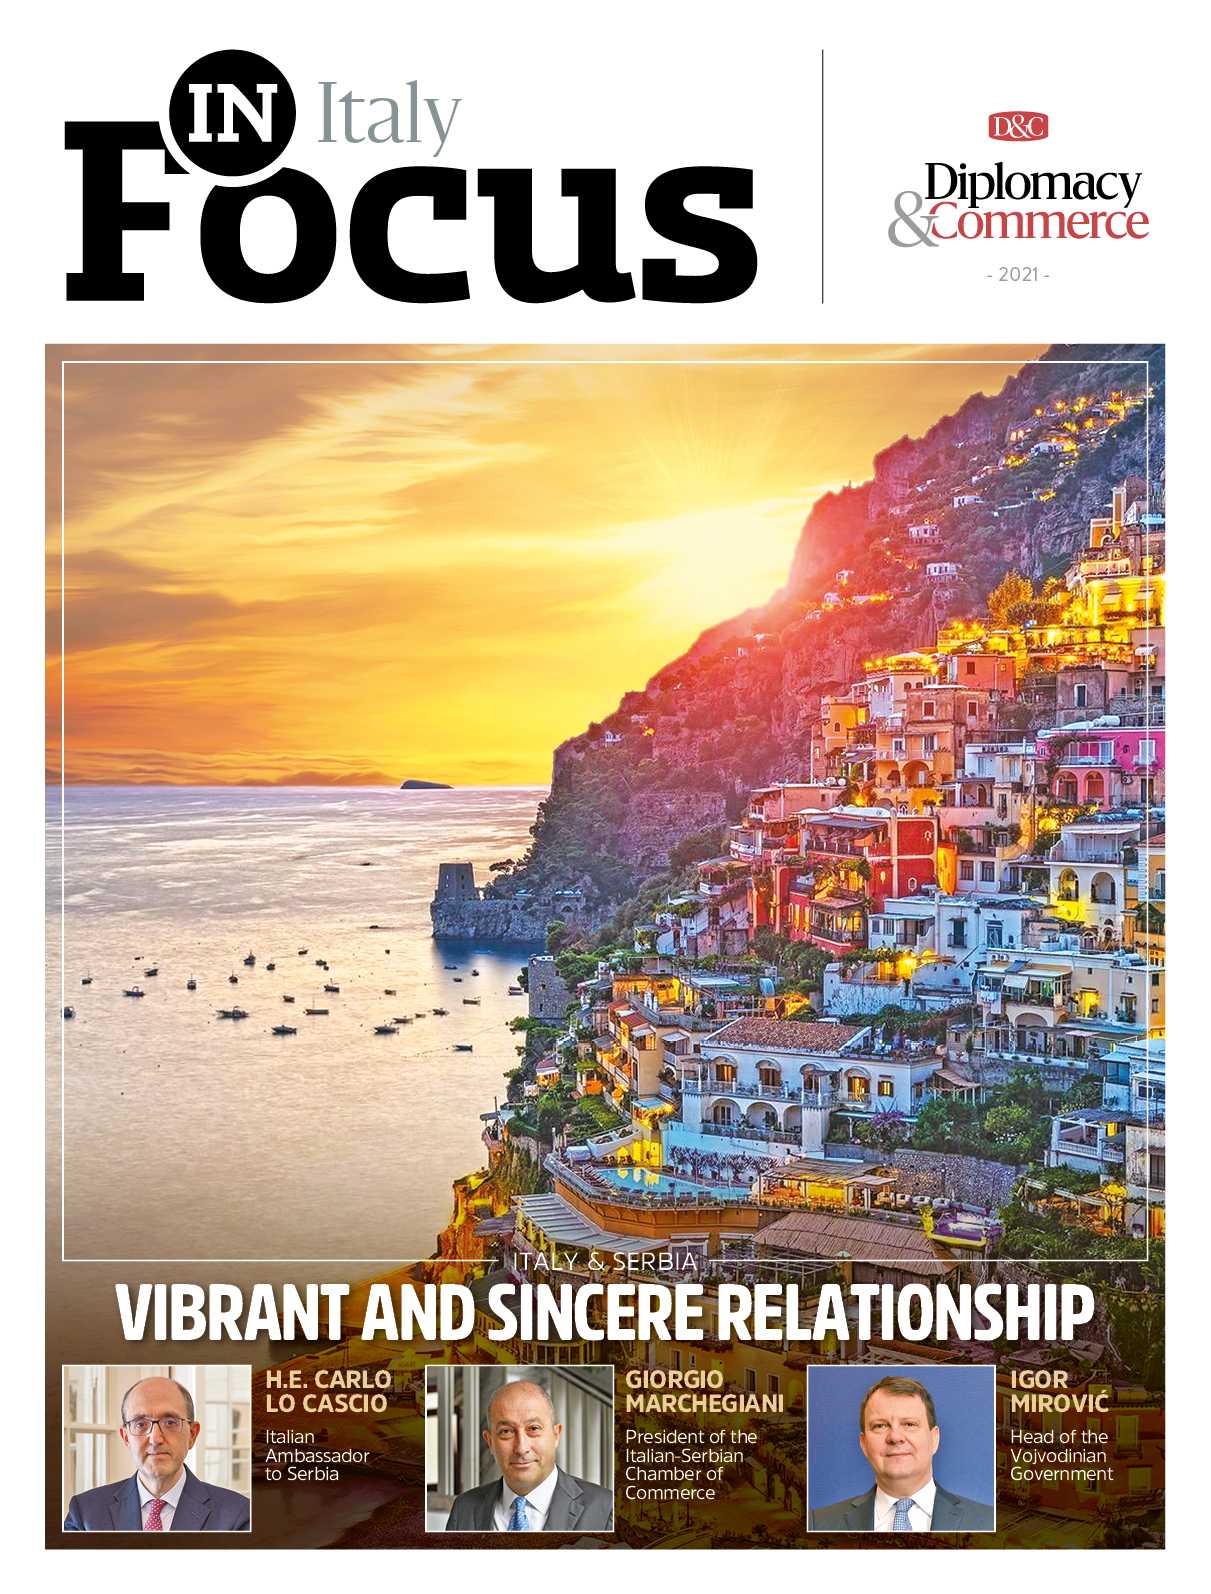 DandC - diplomacy and commerce - In Focus - Italy - 2021